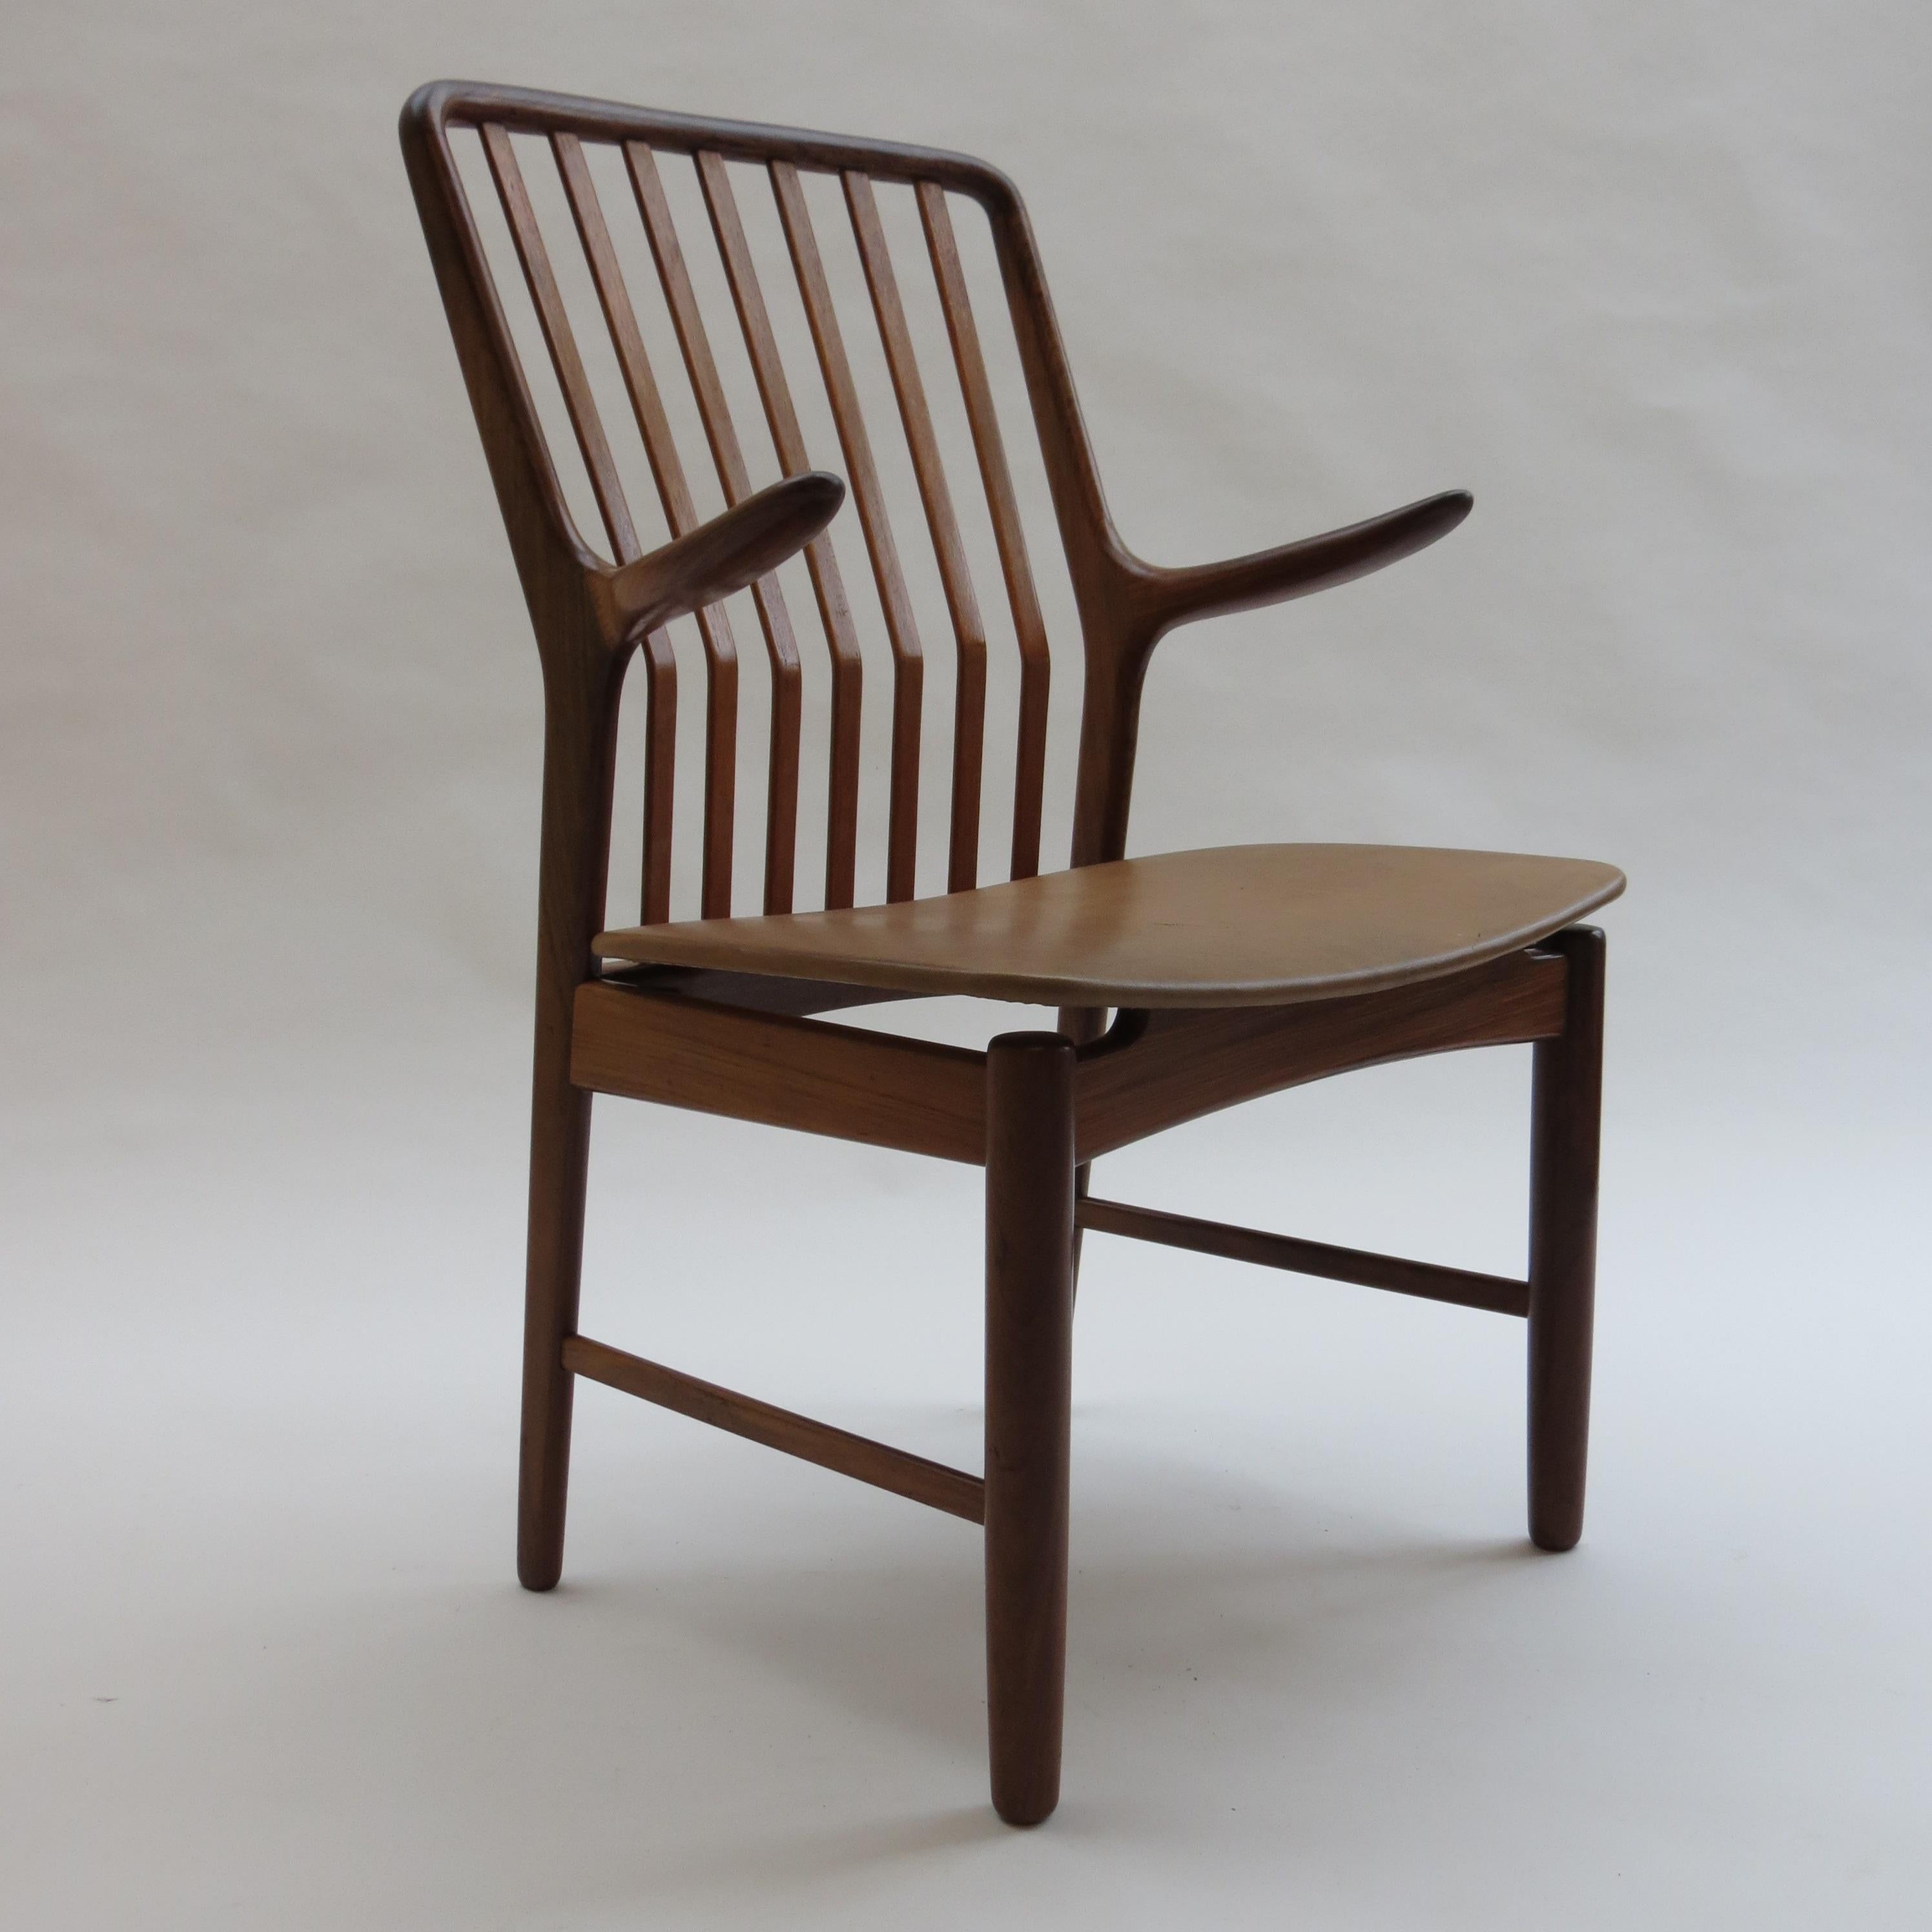 Mid-Century Modern Midcentury Danish Chair by Svend Madsen 1960s Teak with Leather Seat